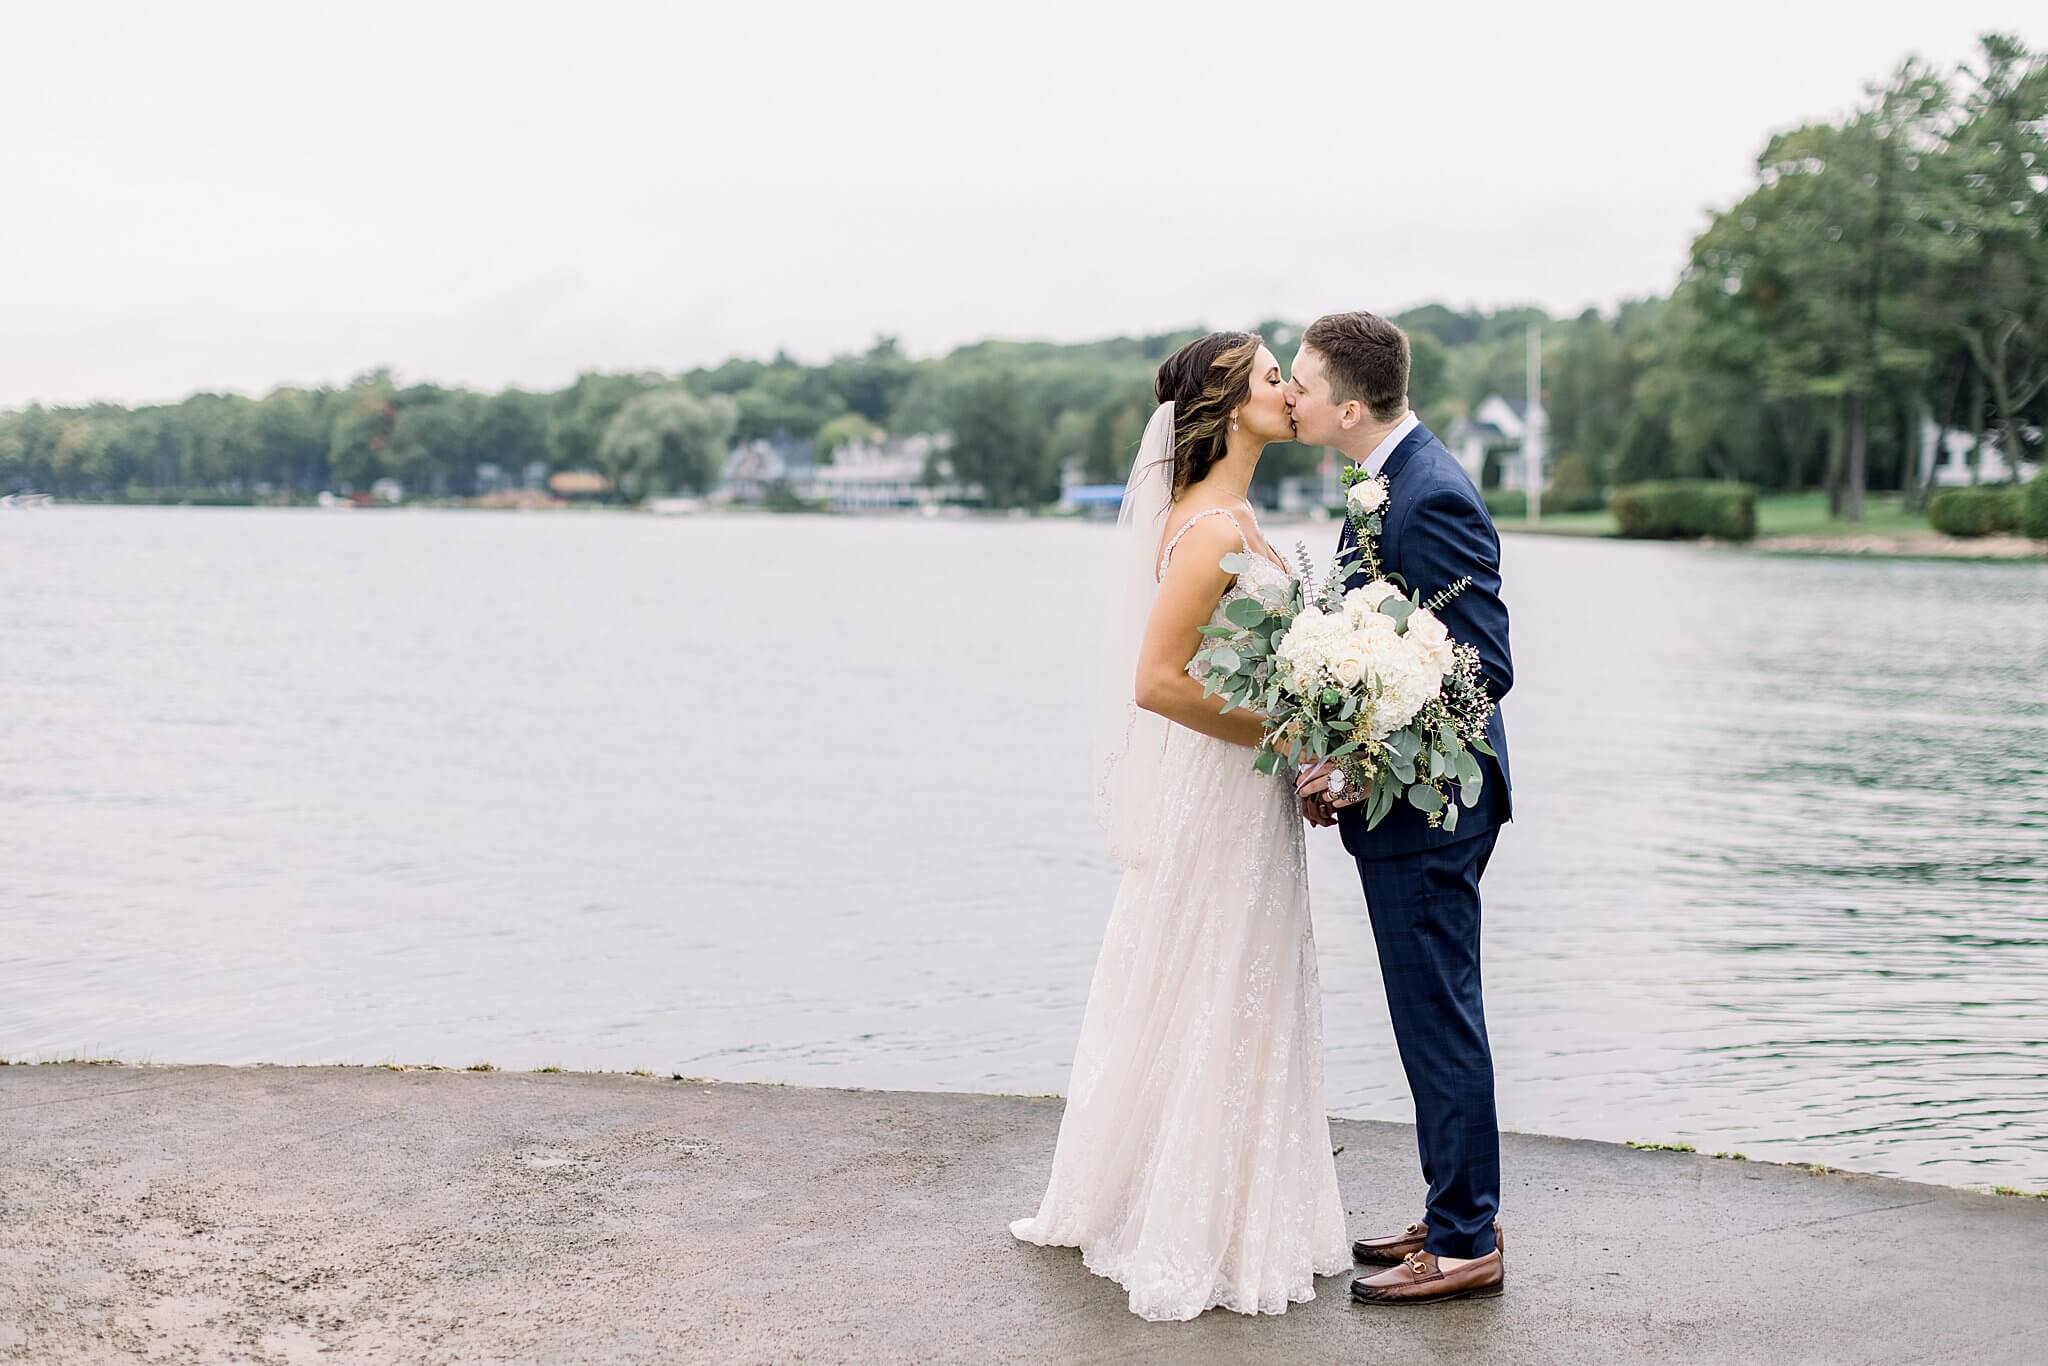 Bride and groom share a kiss on the pier in Harbor Springs, Michigan during Intimate Northern Michigan Wedding.